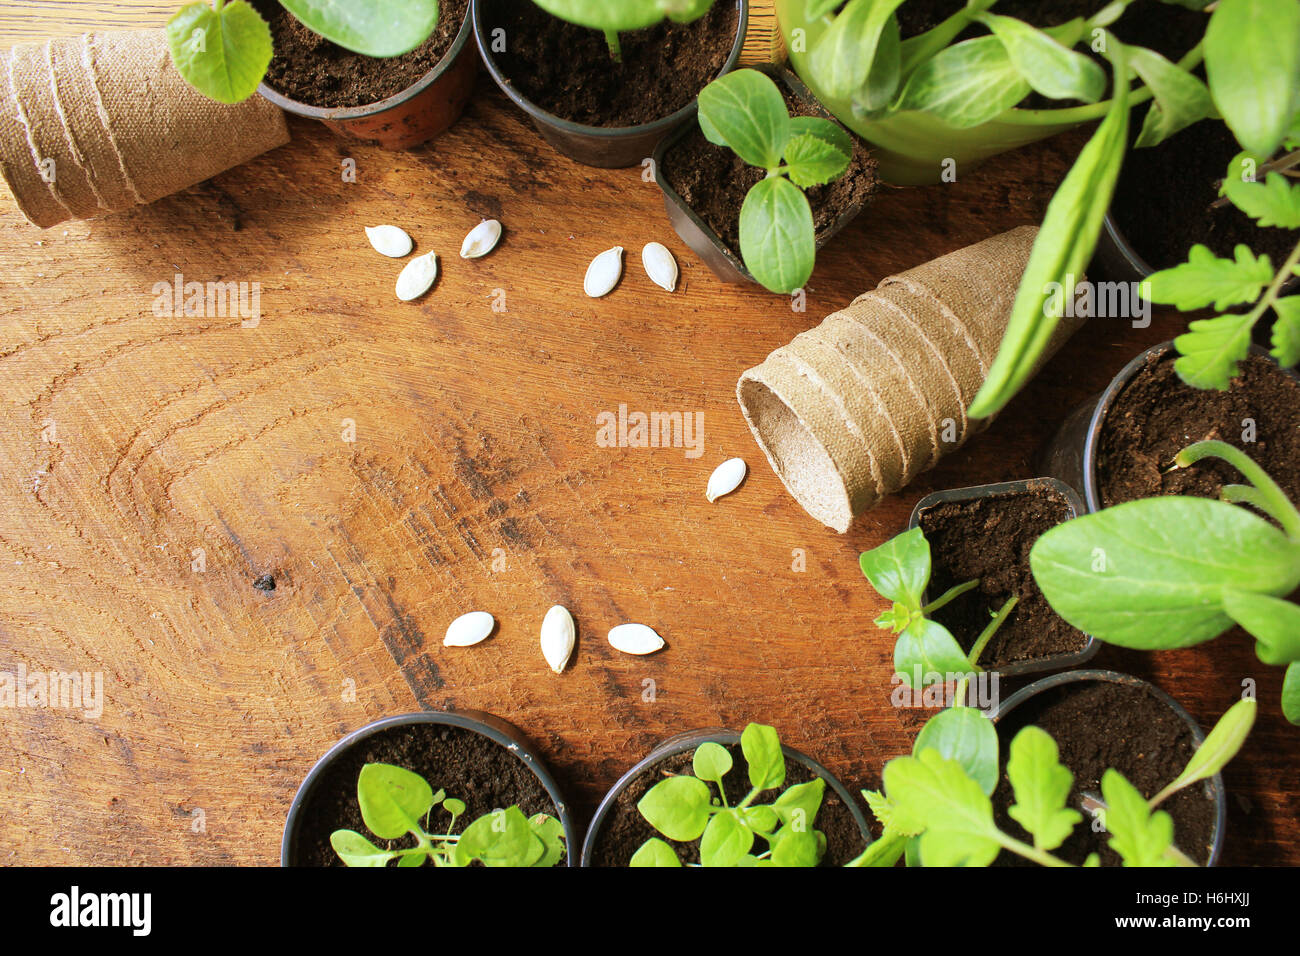 gardening concept background with free text space Stock Photo